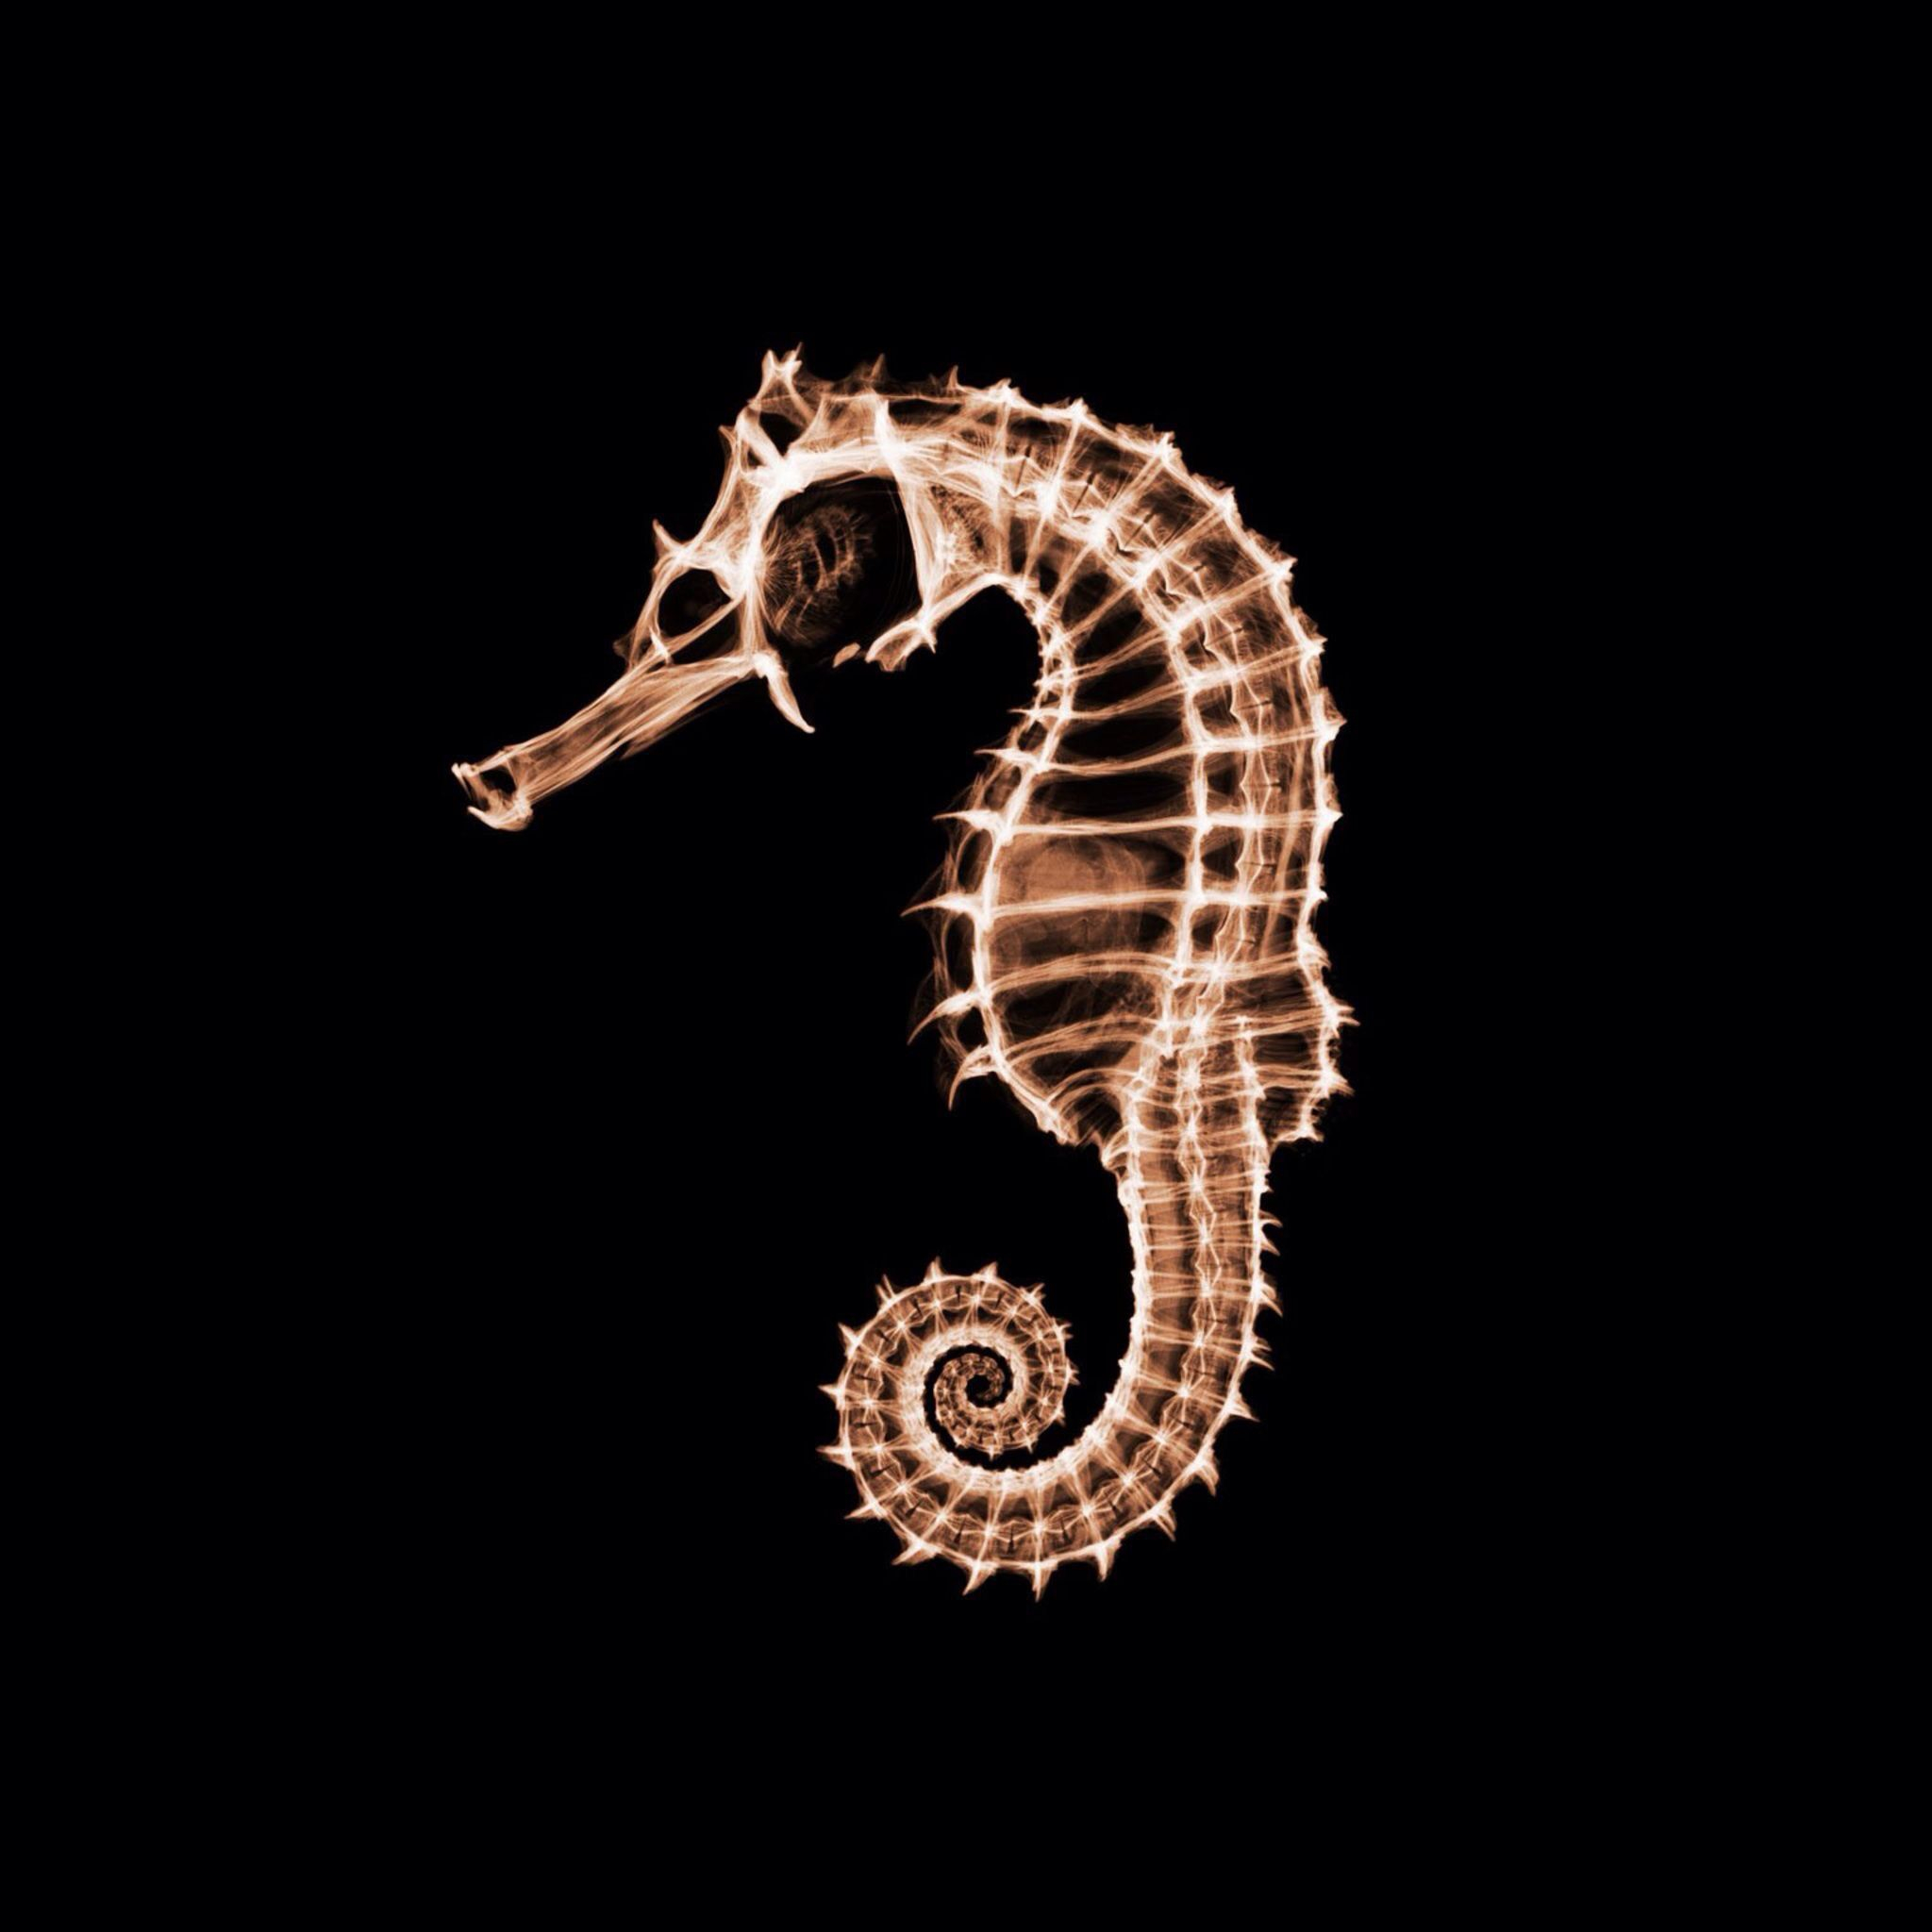 2048x2048 Pin by Alicia D. on Wallpapers | Seahorse, Horse wallpaper, Ocean animals